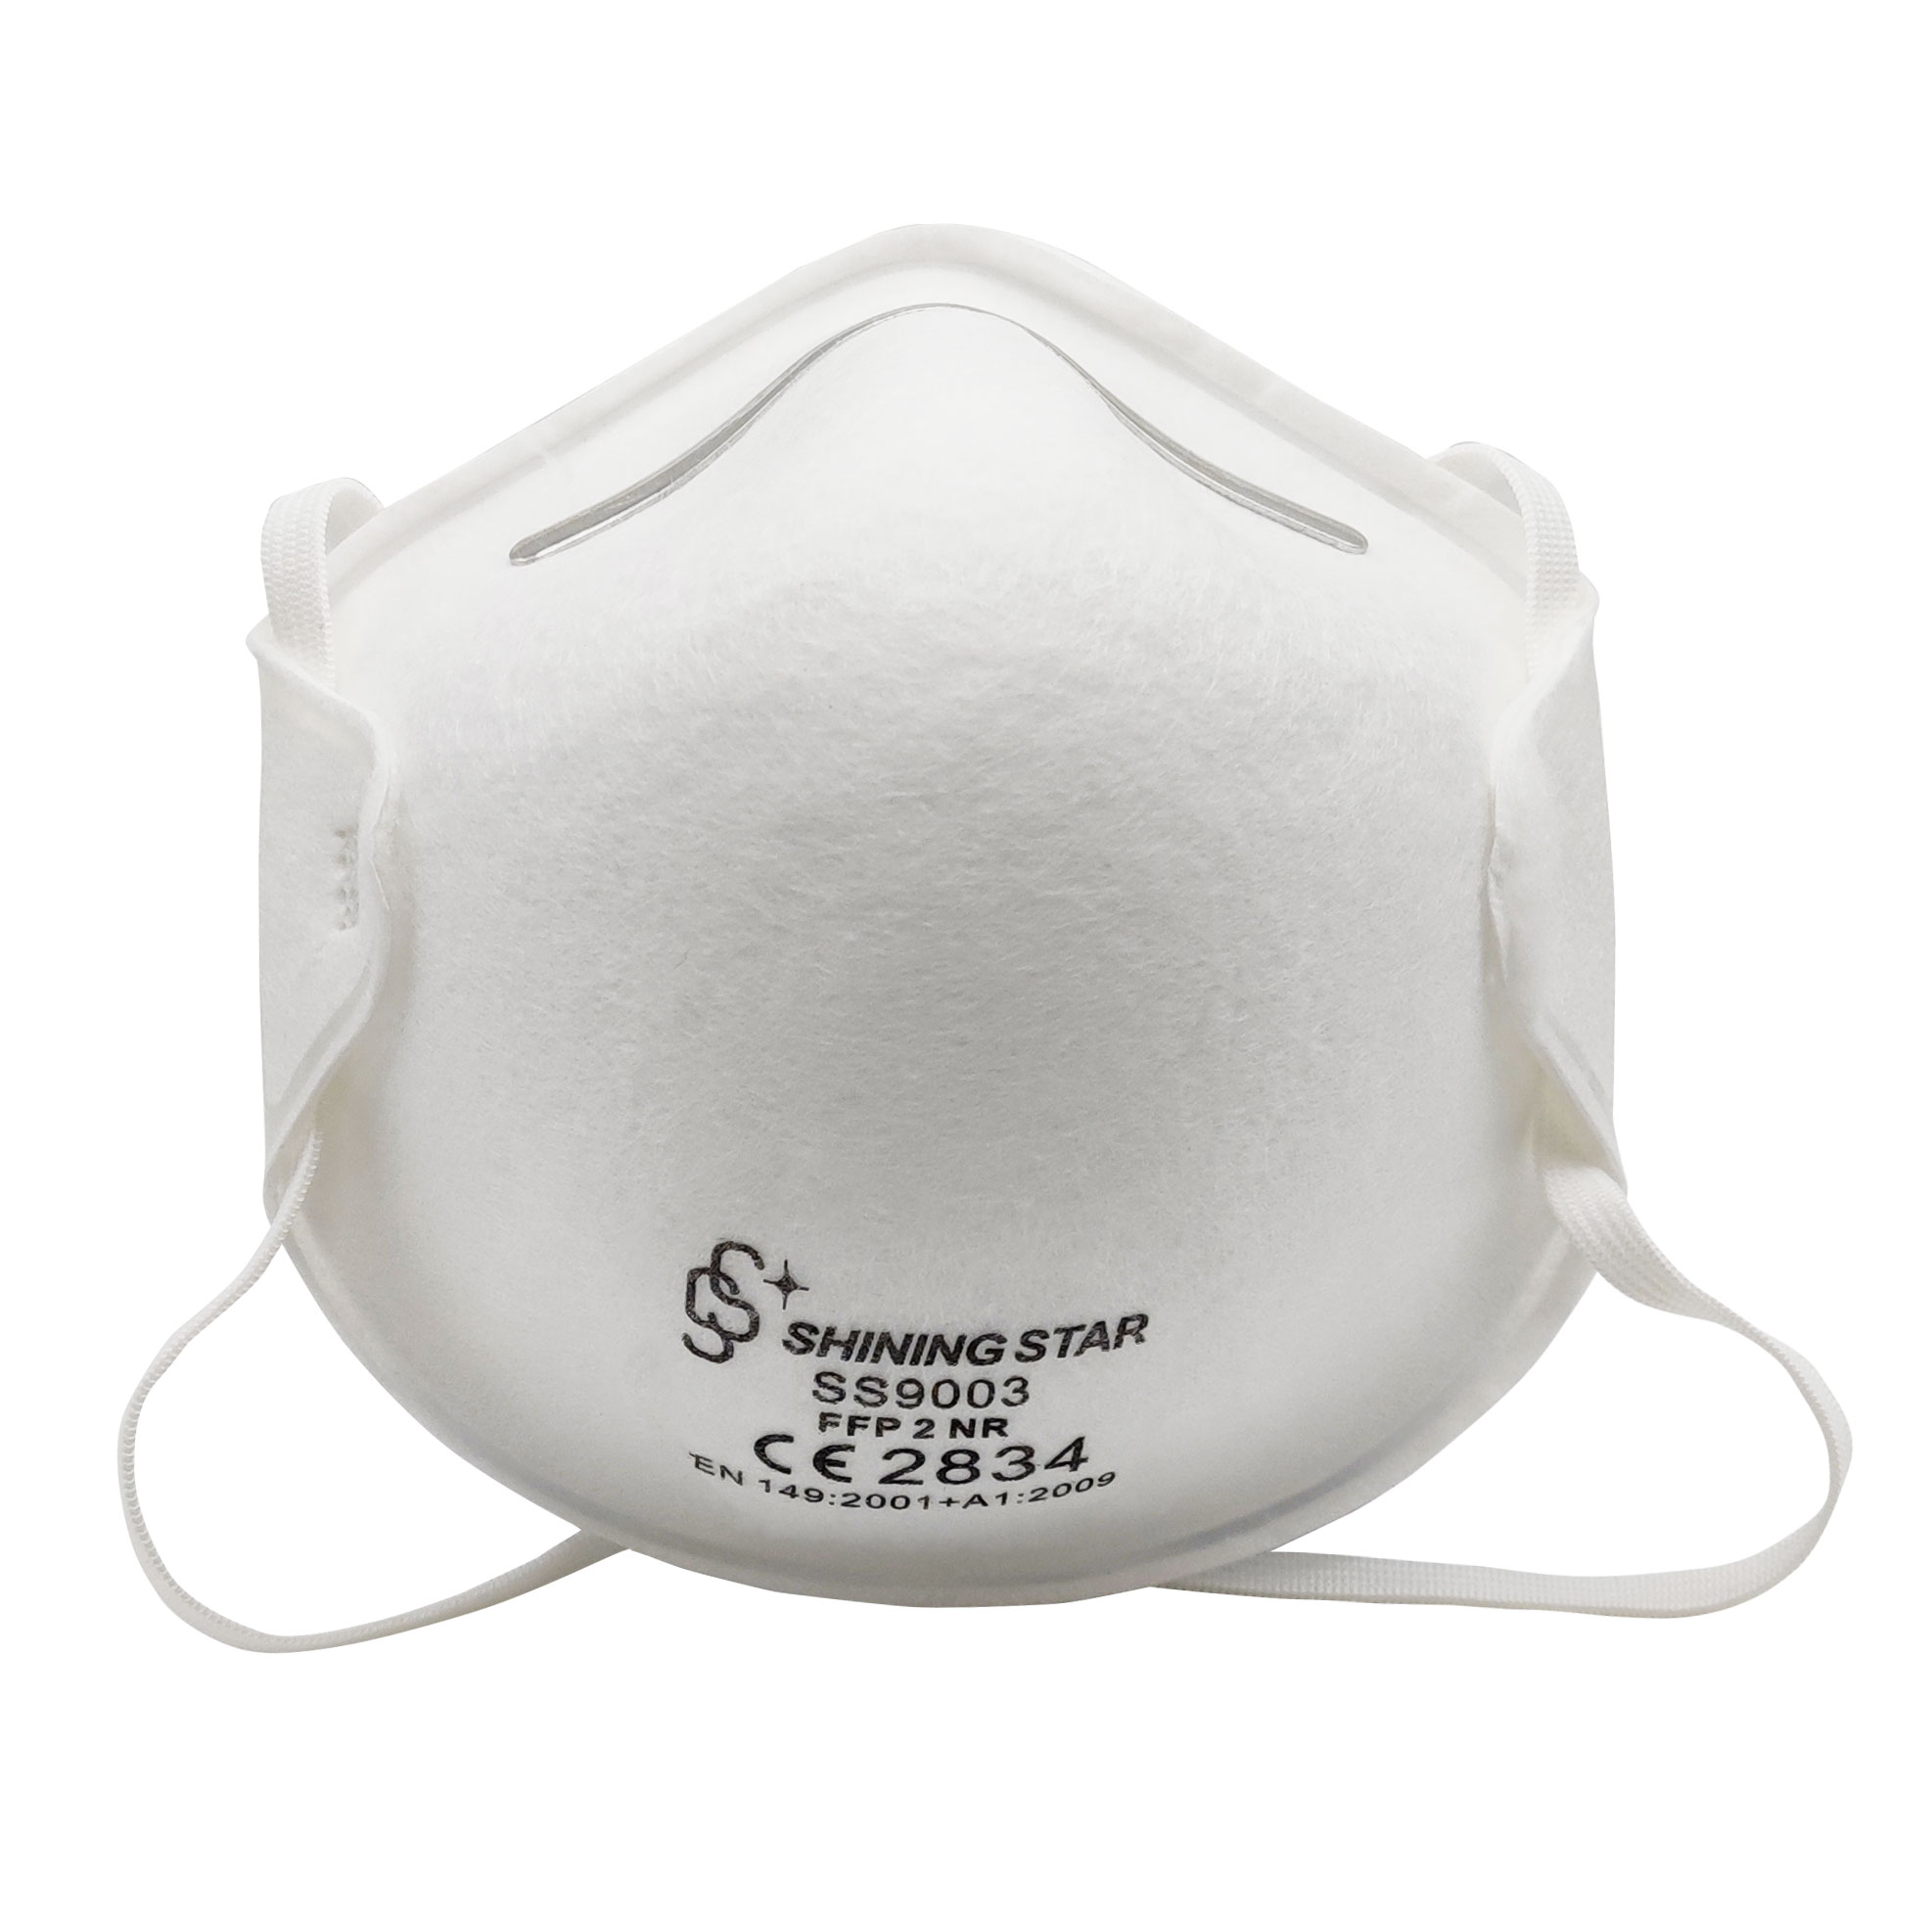 SS9003-FFP2 Disposable Particulate Respirator Featured Image